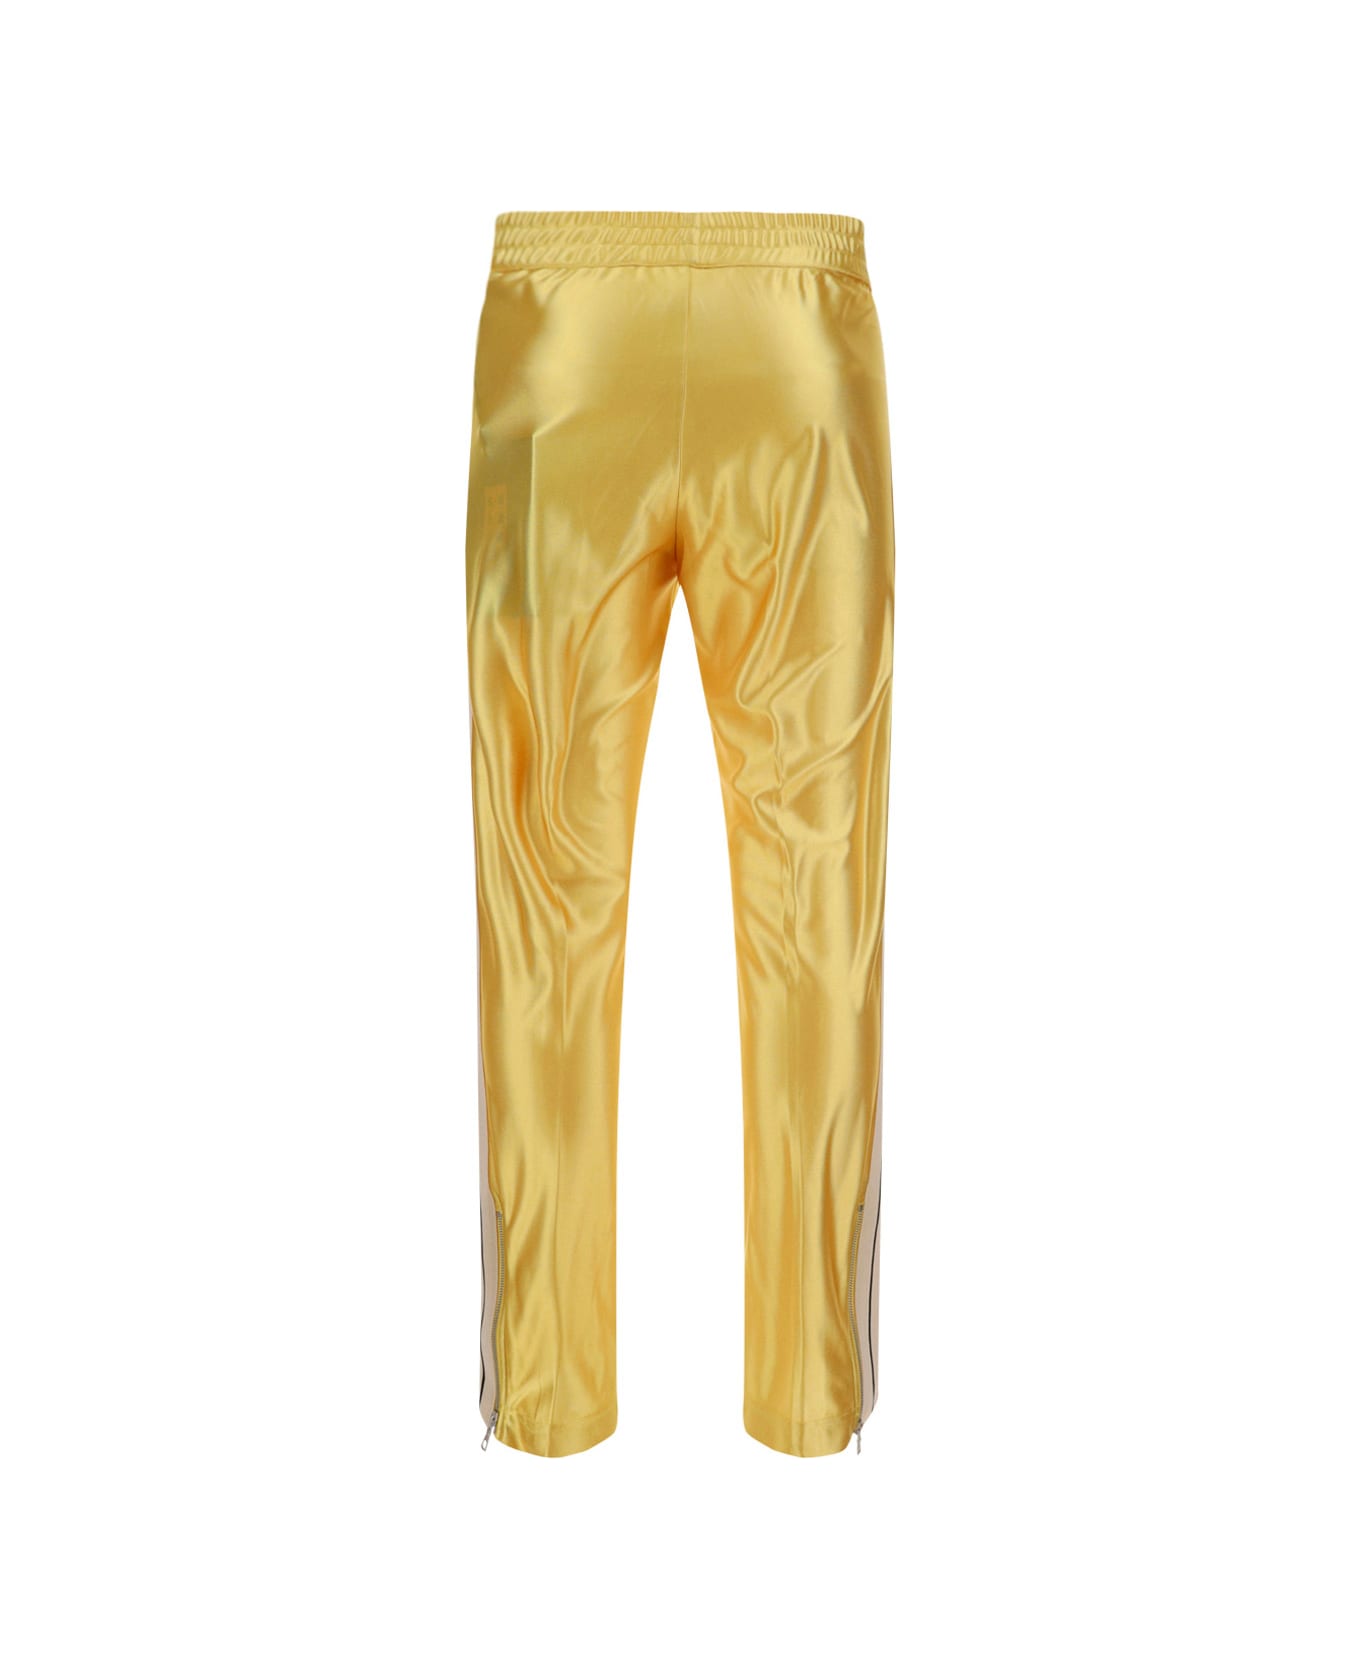 Moncler X Palm Angels Palm Angels X Moncler Track Pants - Oro name:467